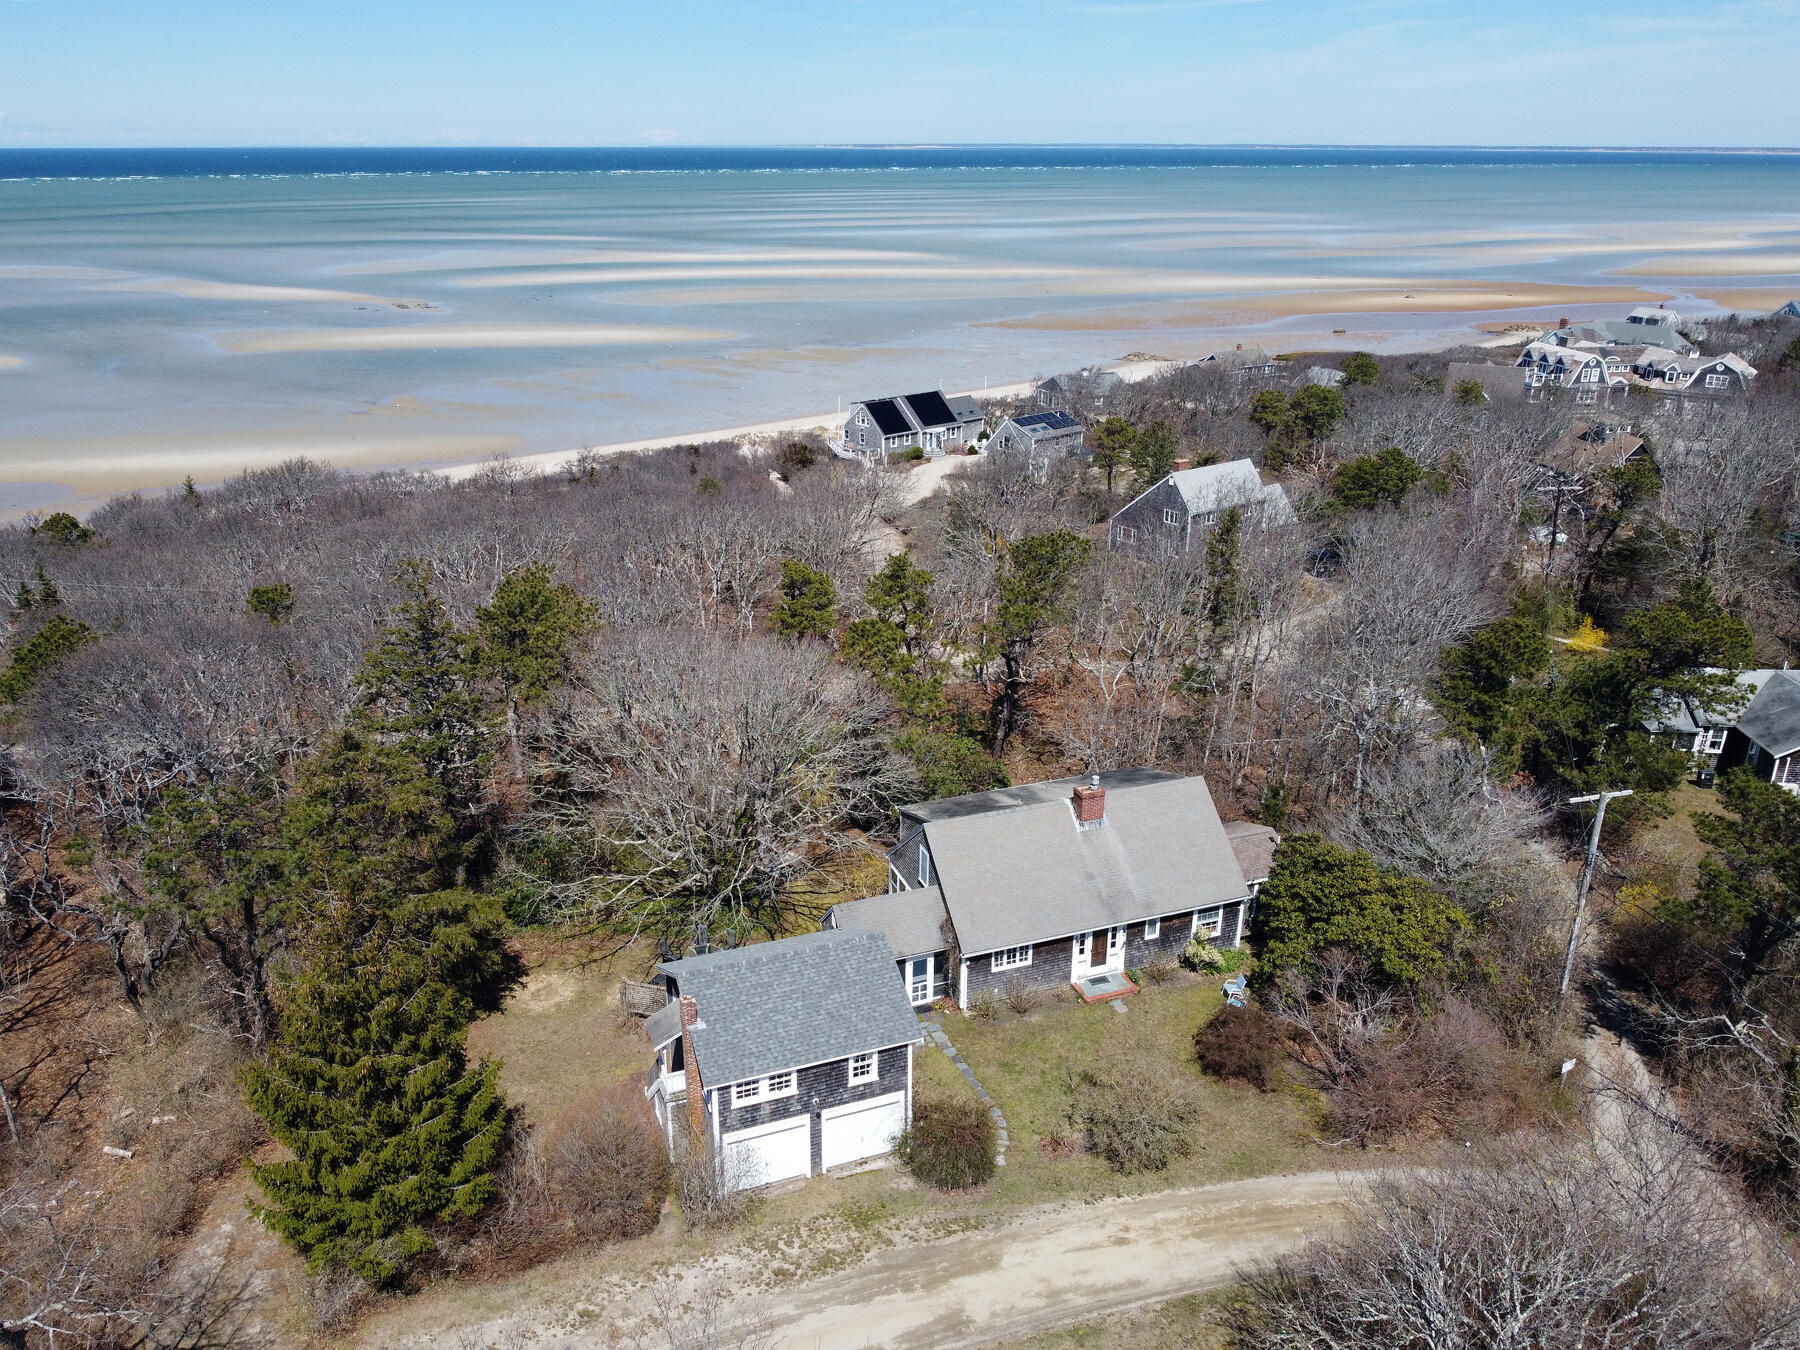 31 Governor Winthrop Road, Brewster, MA 02631